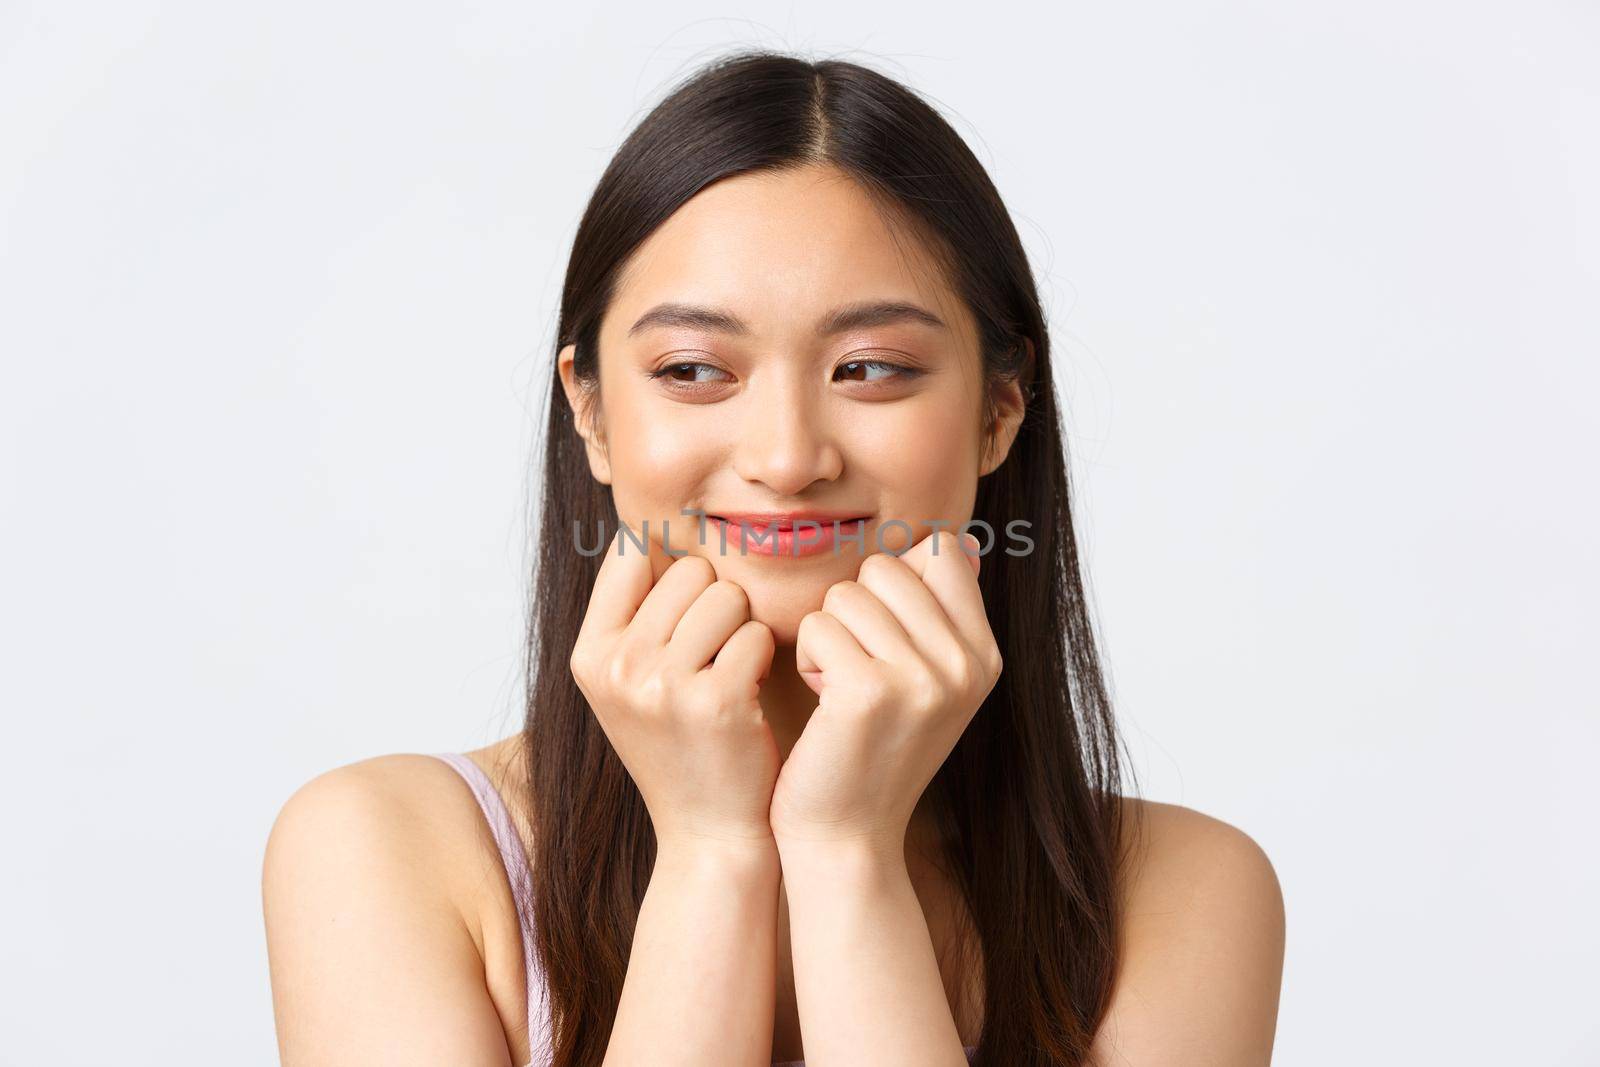 Concept of beauty, fashion and makeup products advertisement. Close-up portrait of adorable romantic asian woman, looking dreamy aside as imaging or remember lovely moment, white background.